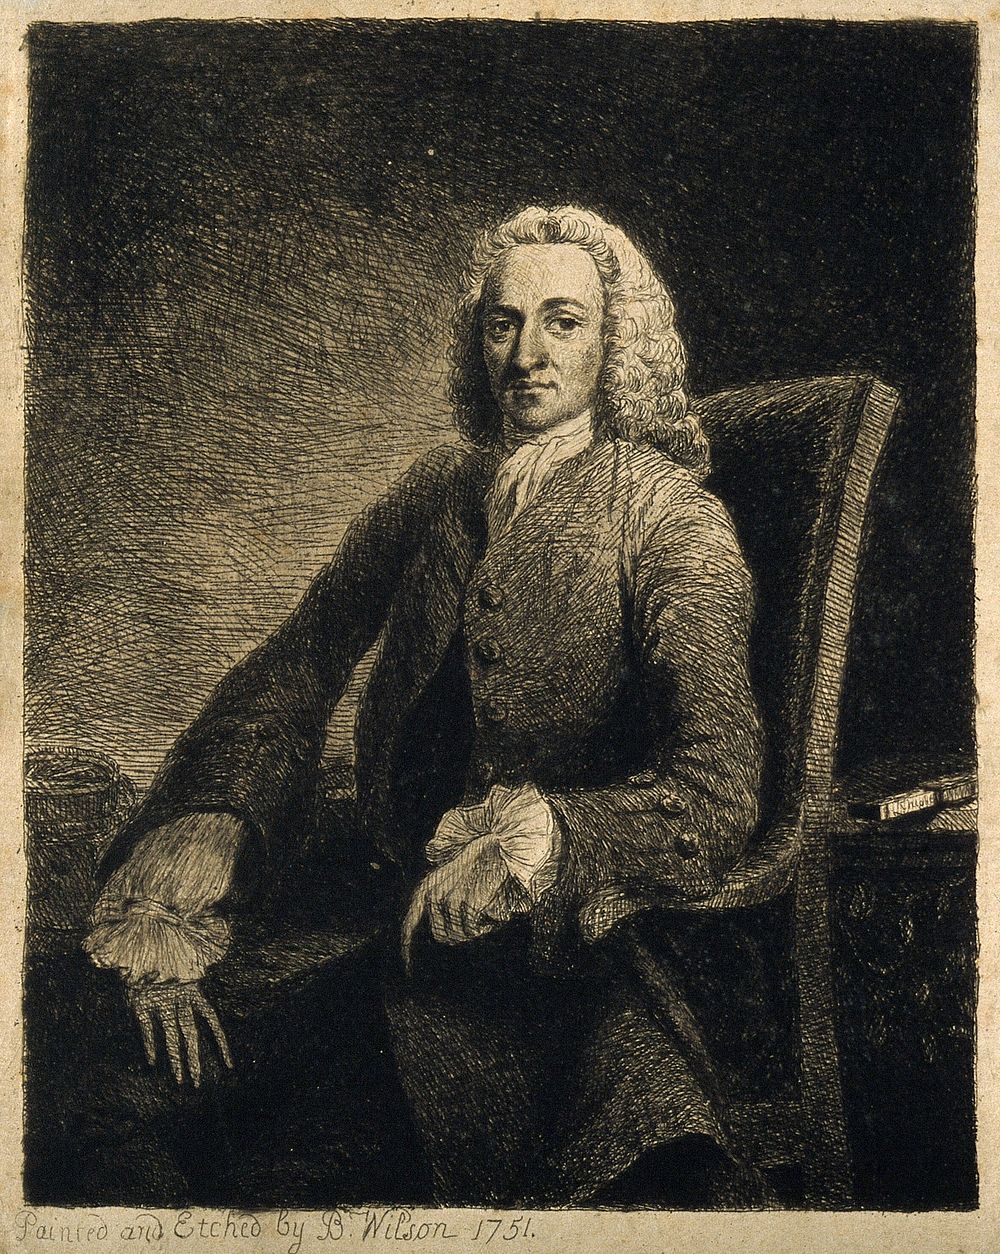 Gowin Knight. Etching by B. Wilson, 1751, after himself.